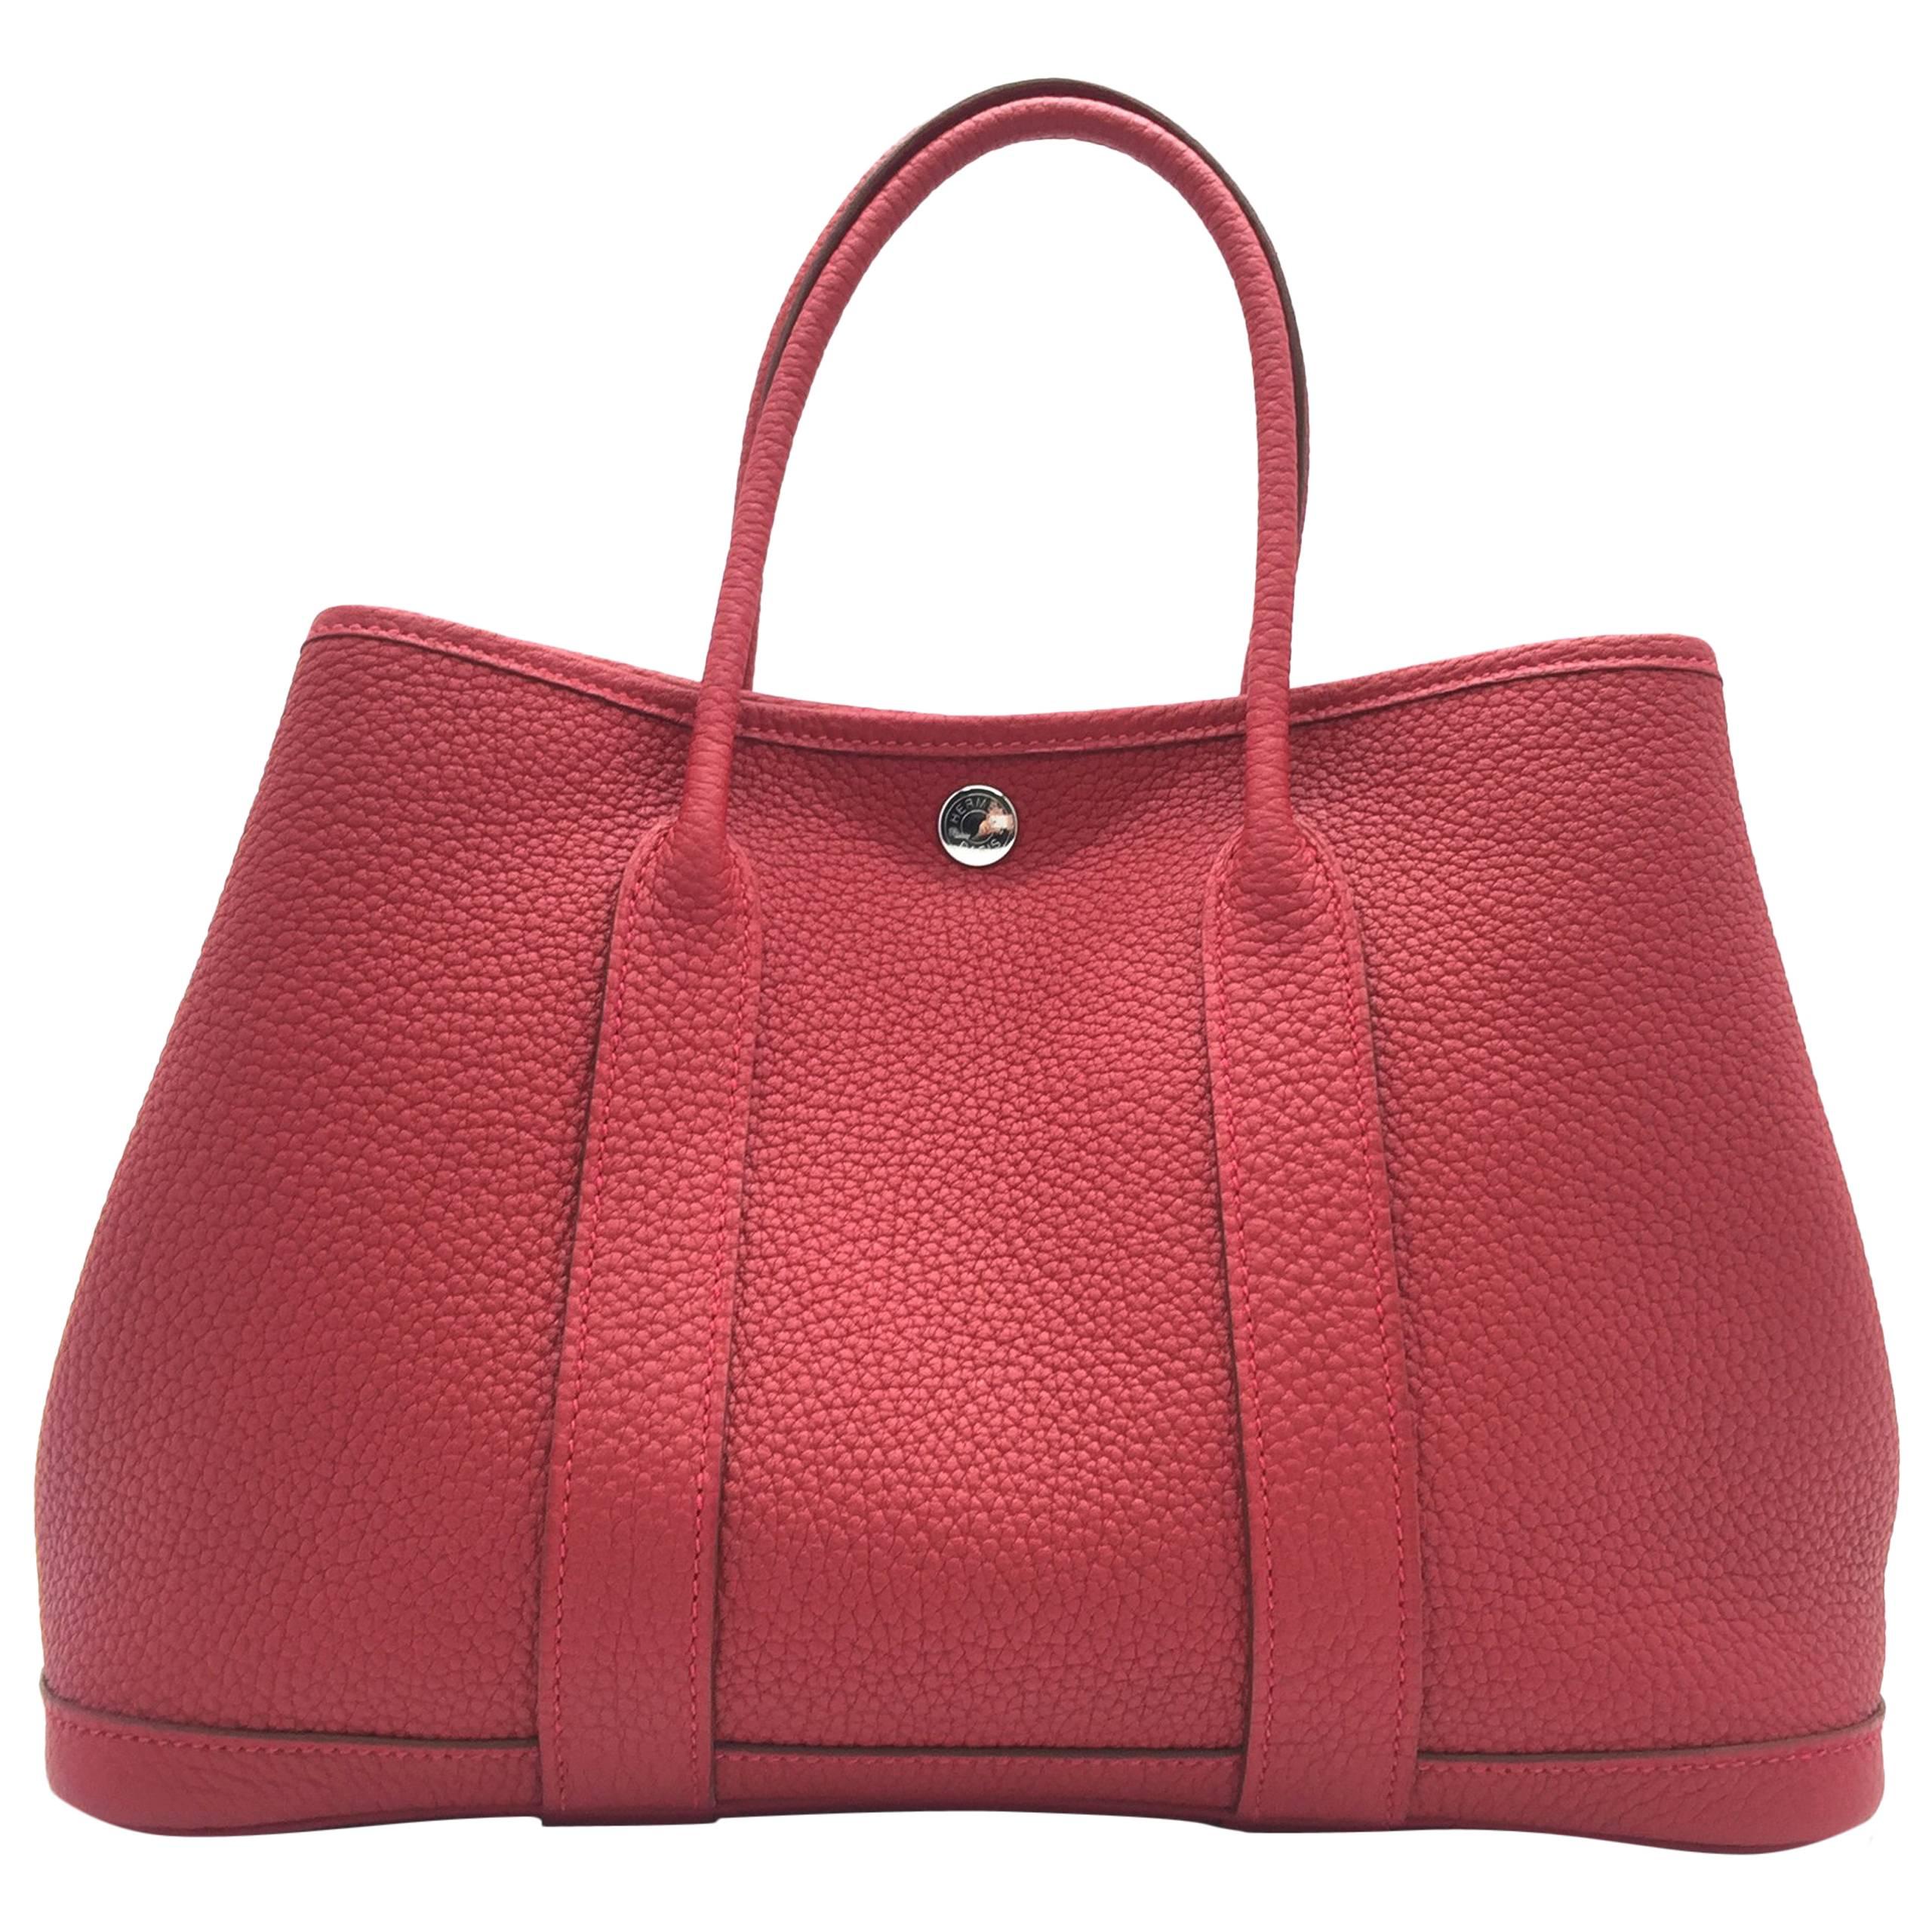 Hermes Garden Party TPM Rouge Piment Red Country Leather Tote Bag